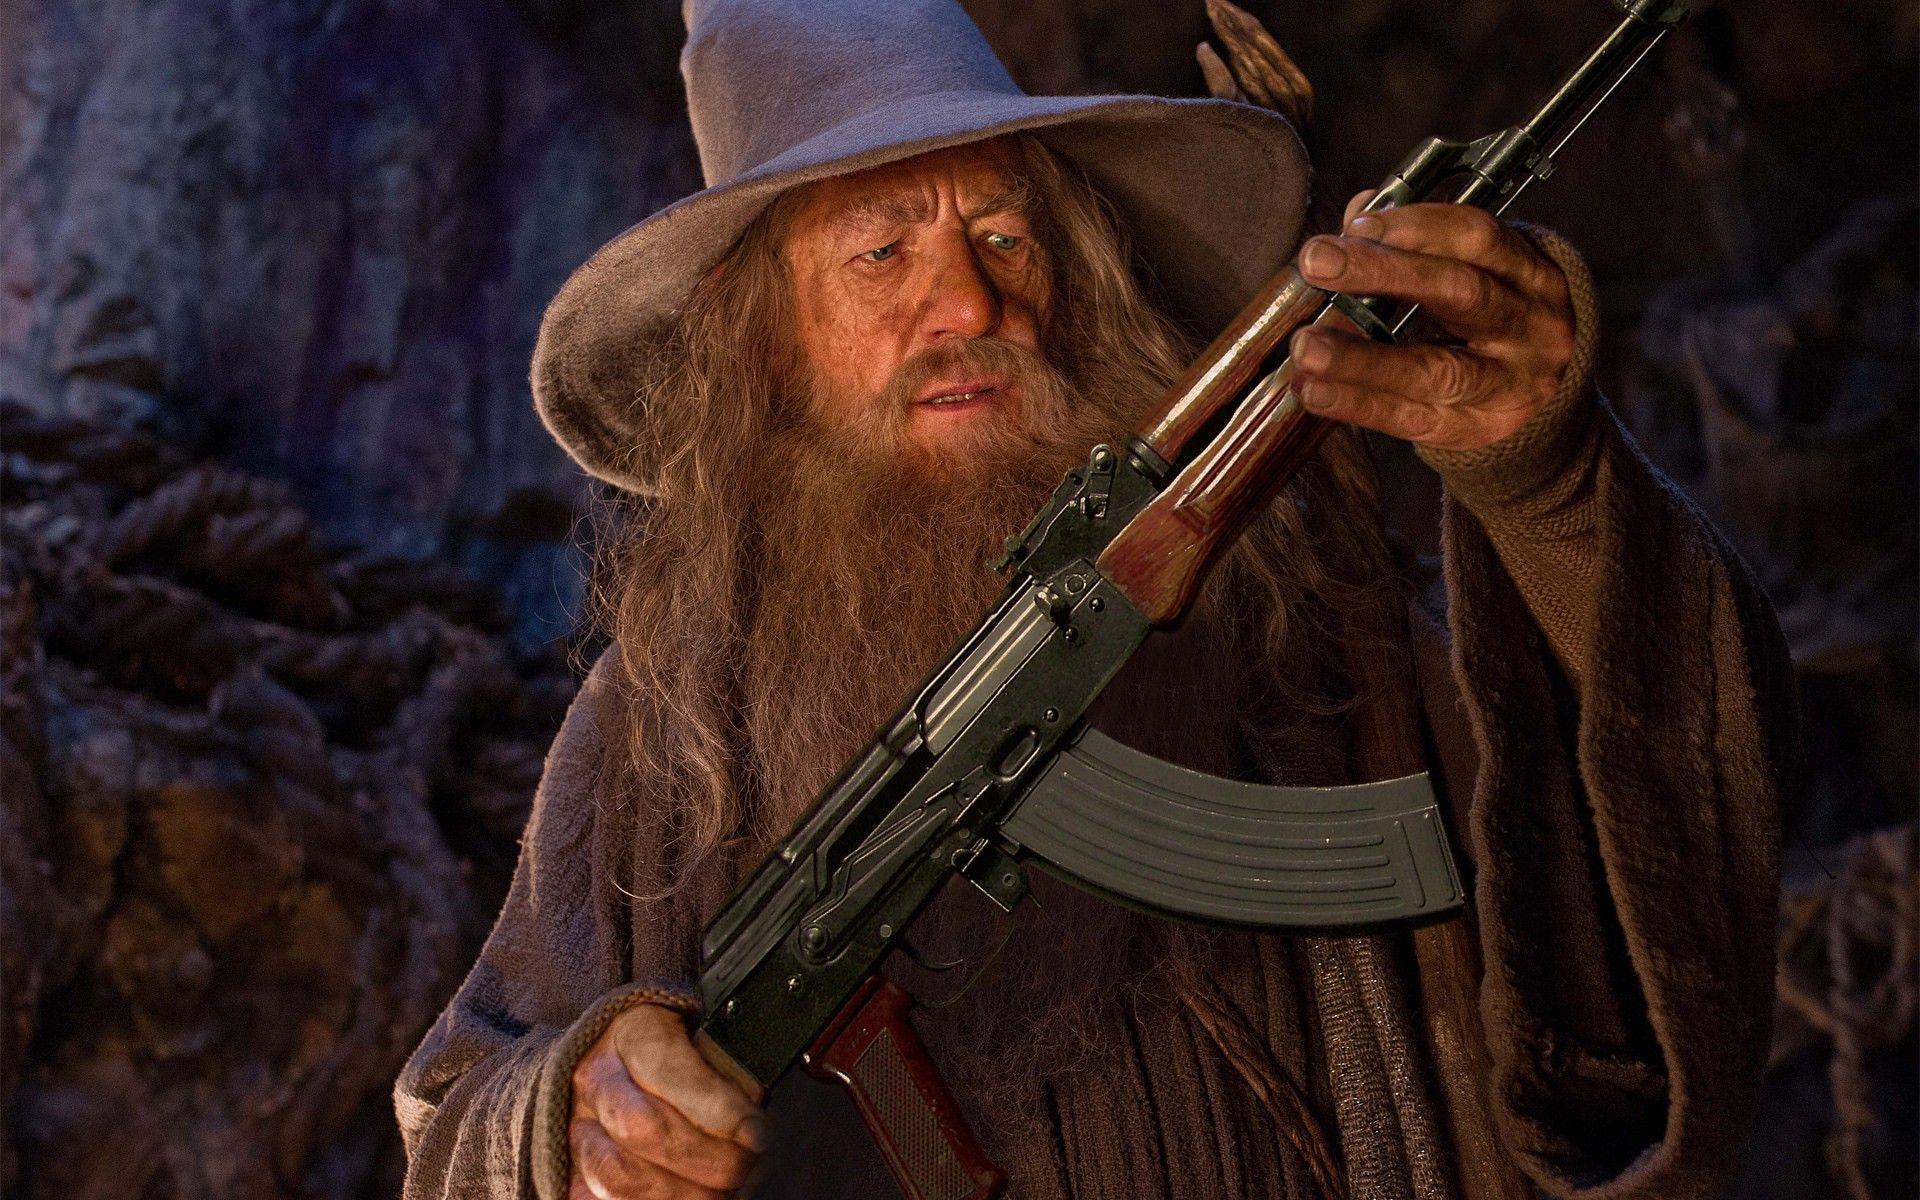 Gandalf finds a new weapon. [1920x1200] Larger image in comments